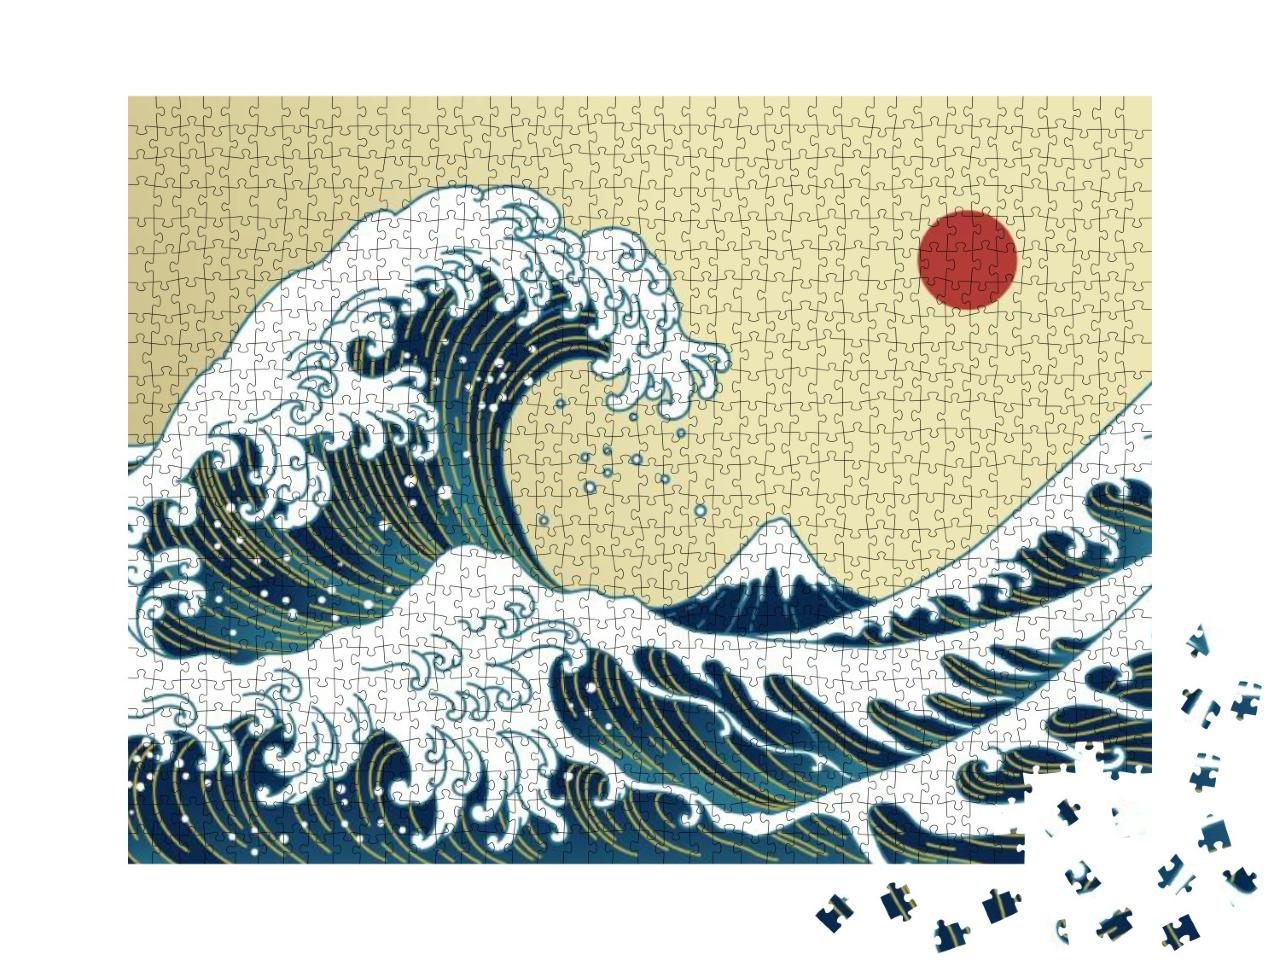 Big Asian Ocean Wave, Red Sun & the Mountain Illustration... Jigsaw Puzzle with 1000 pieces